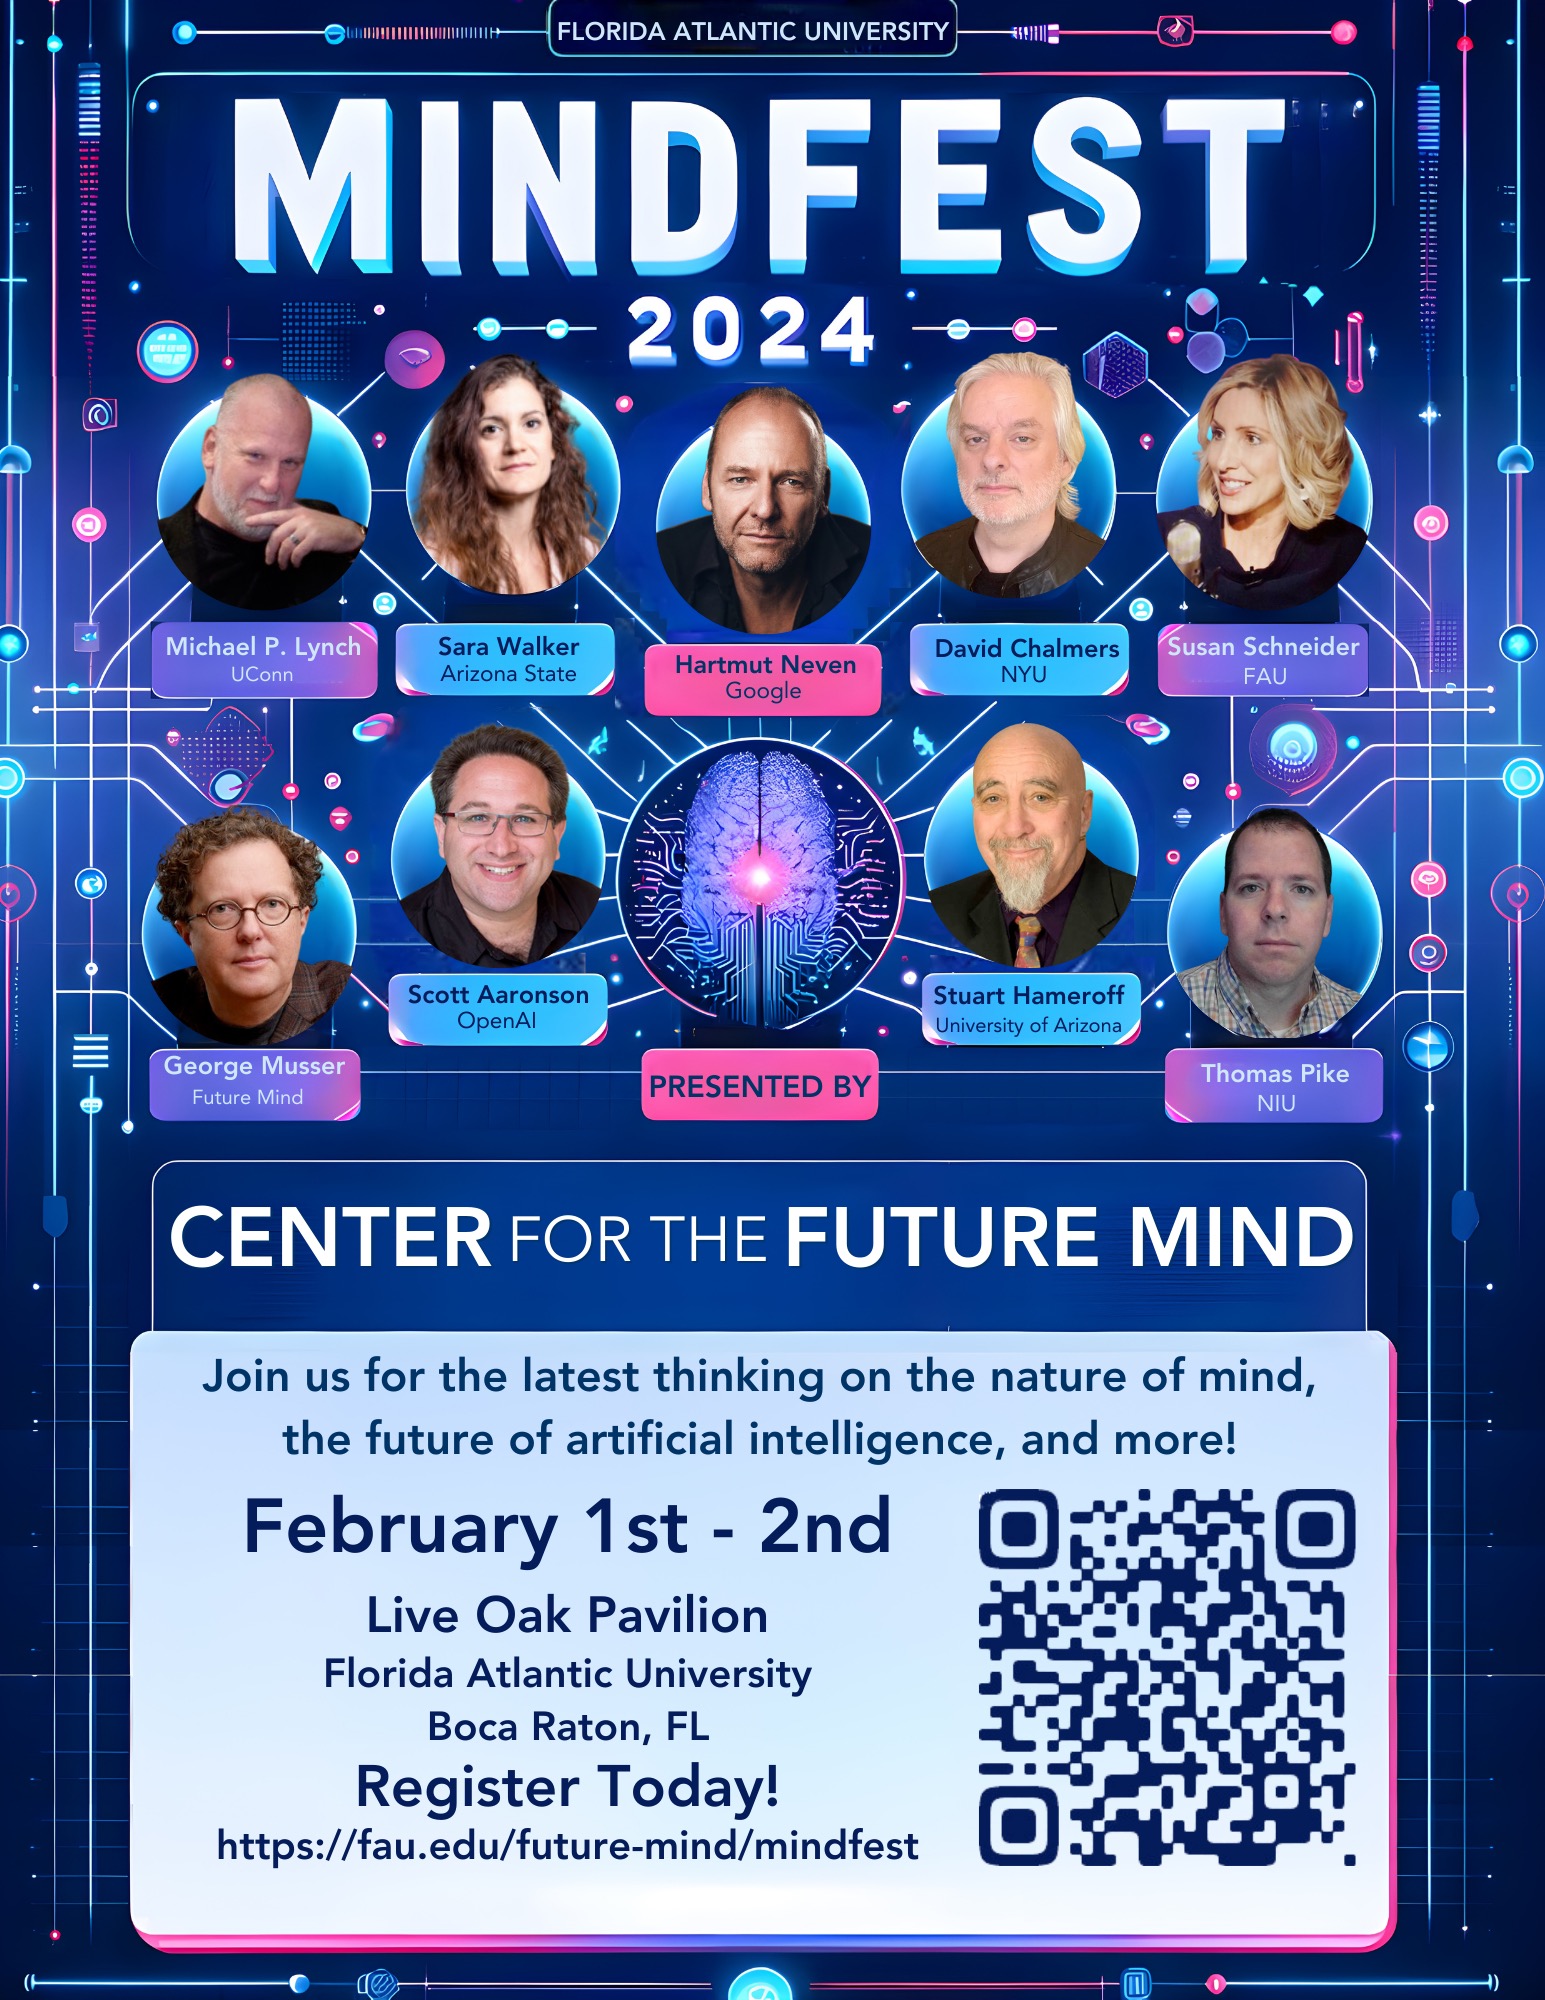 Mindfest flyer - colorful brain and light effects